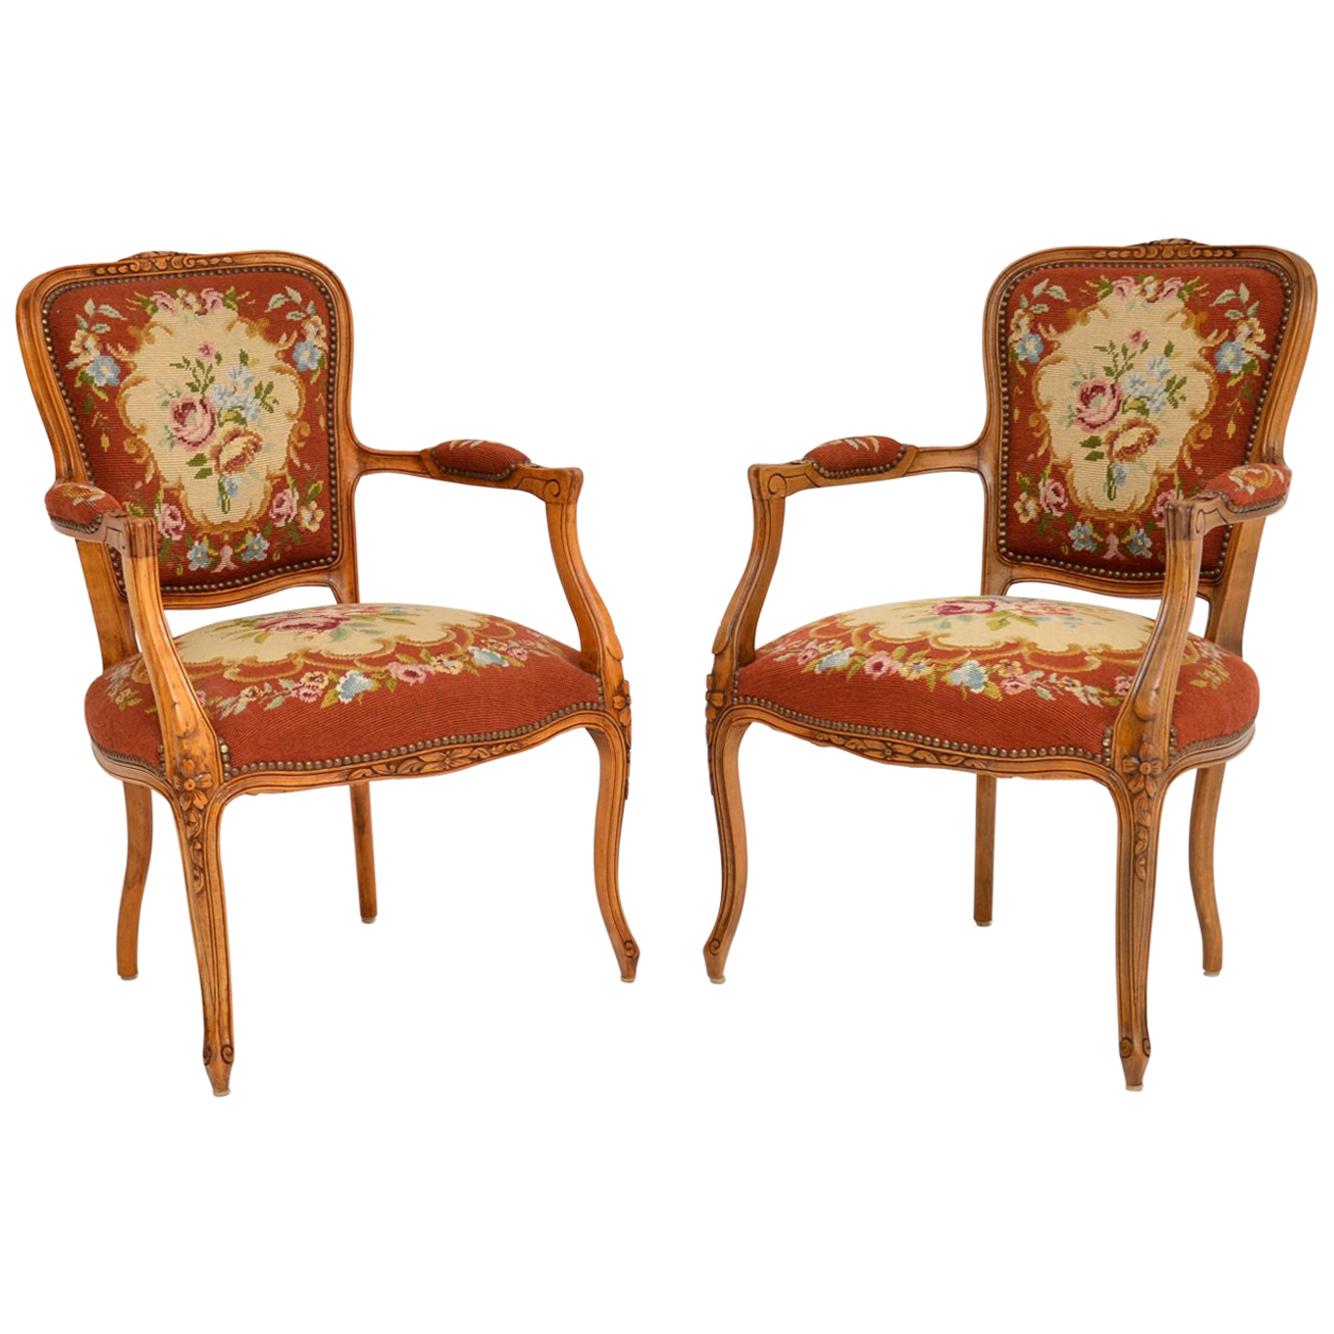 Pair of Antique French Tapestry Salon Armchairs